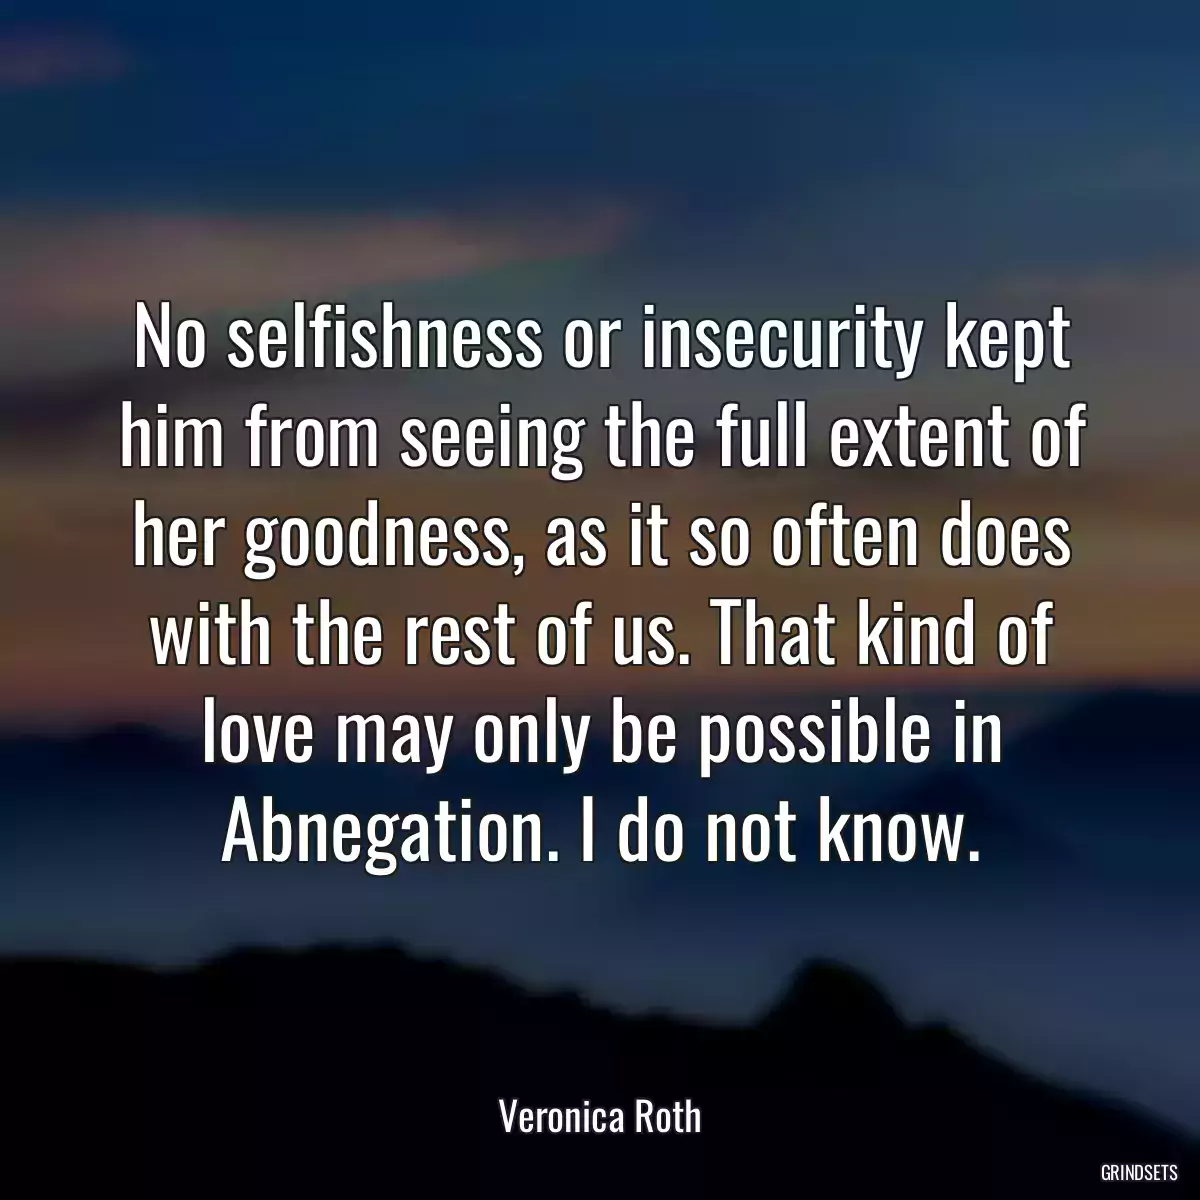 No selfishness or insecurity kept him from seeing the full extent of her goodness, as it so often does with the rest of us. That kind of love may only be possible in Abnegation. I do not know.